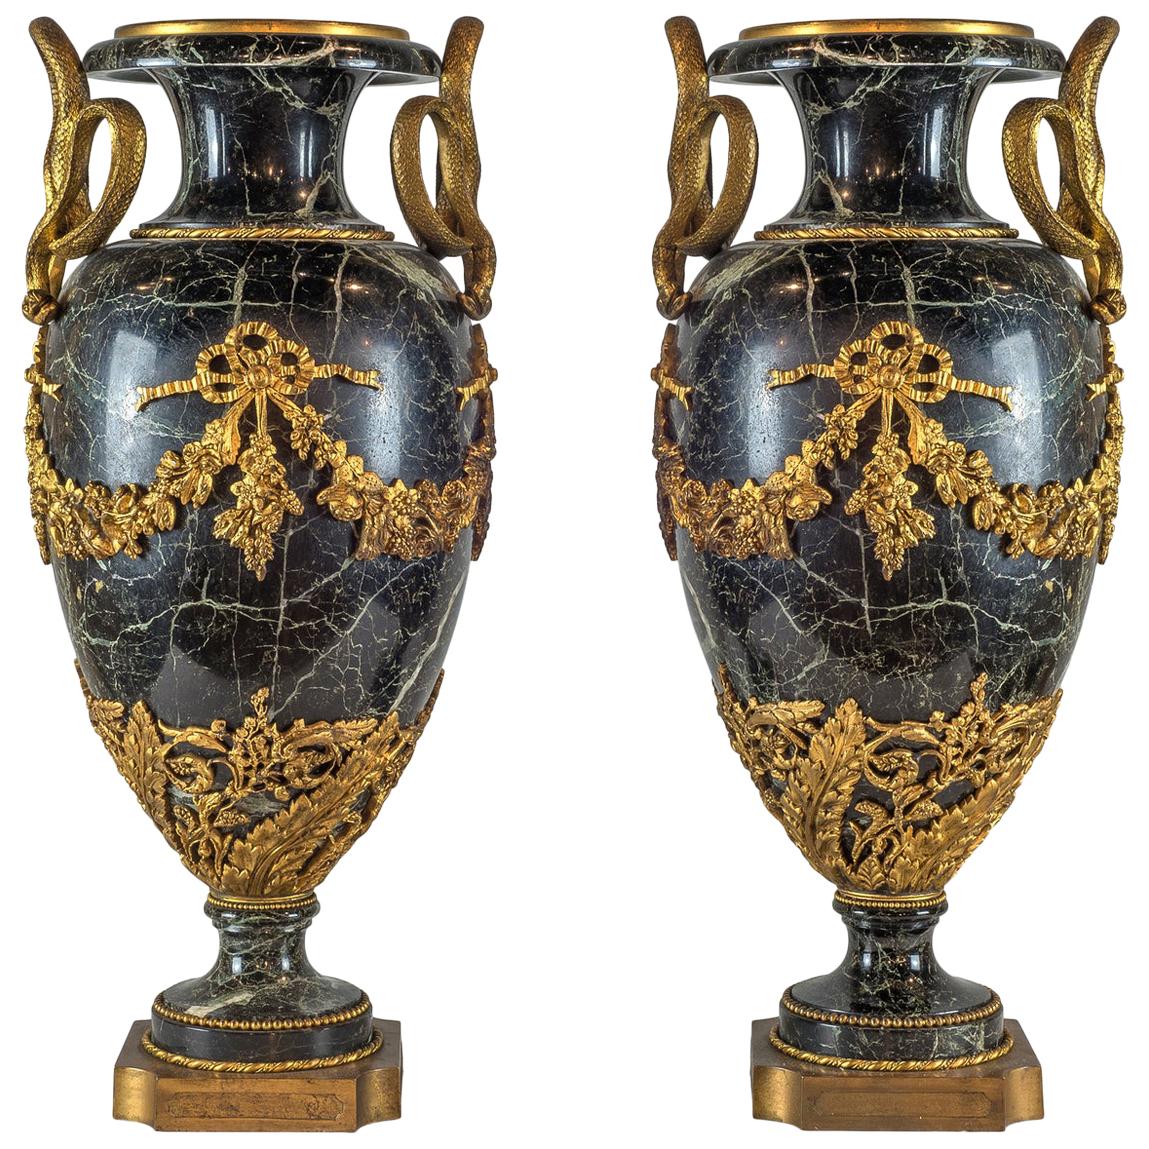 A Grand Ormolu-Mounted Verde Antico Marble Urns with Serpent Handles For Sale